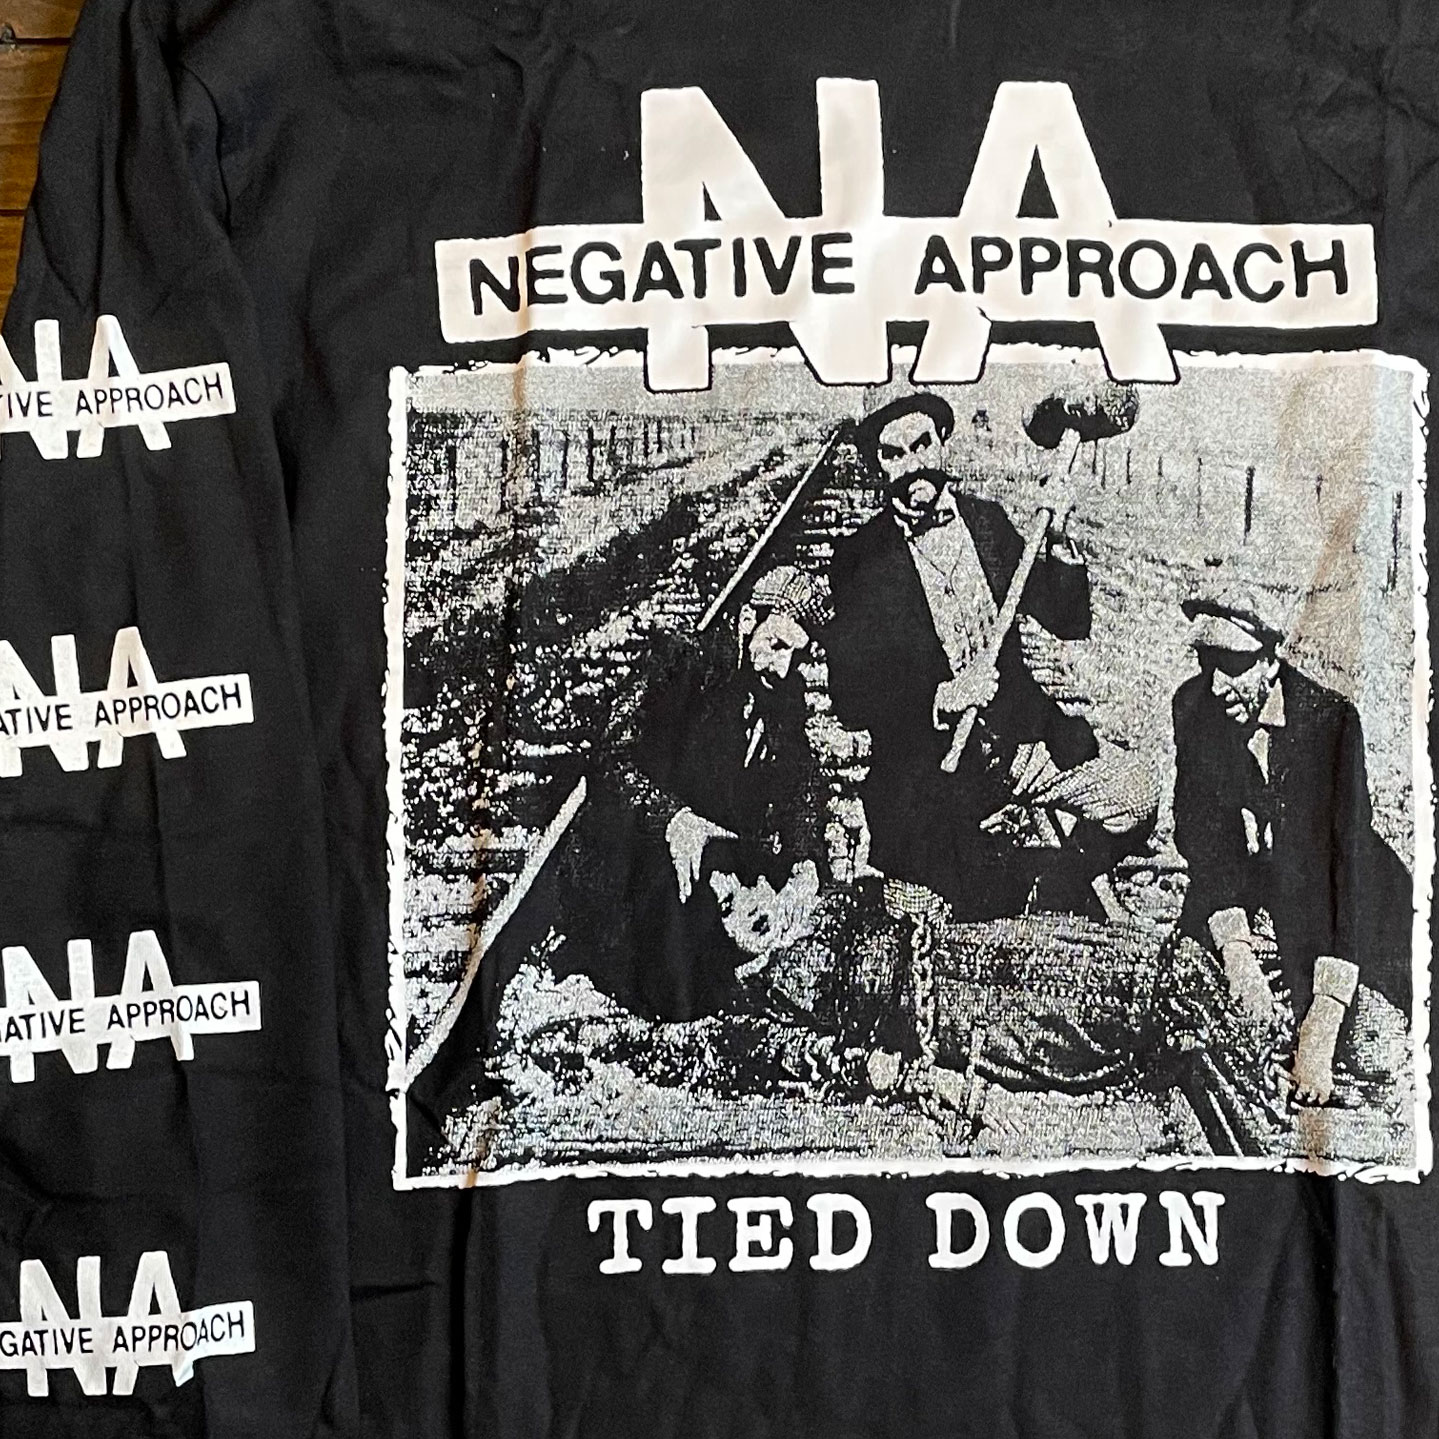 NEGATIVE APPROACH ロングスリーブTシャツ TIED DOWN